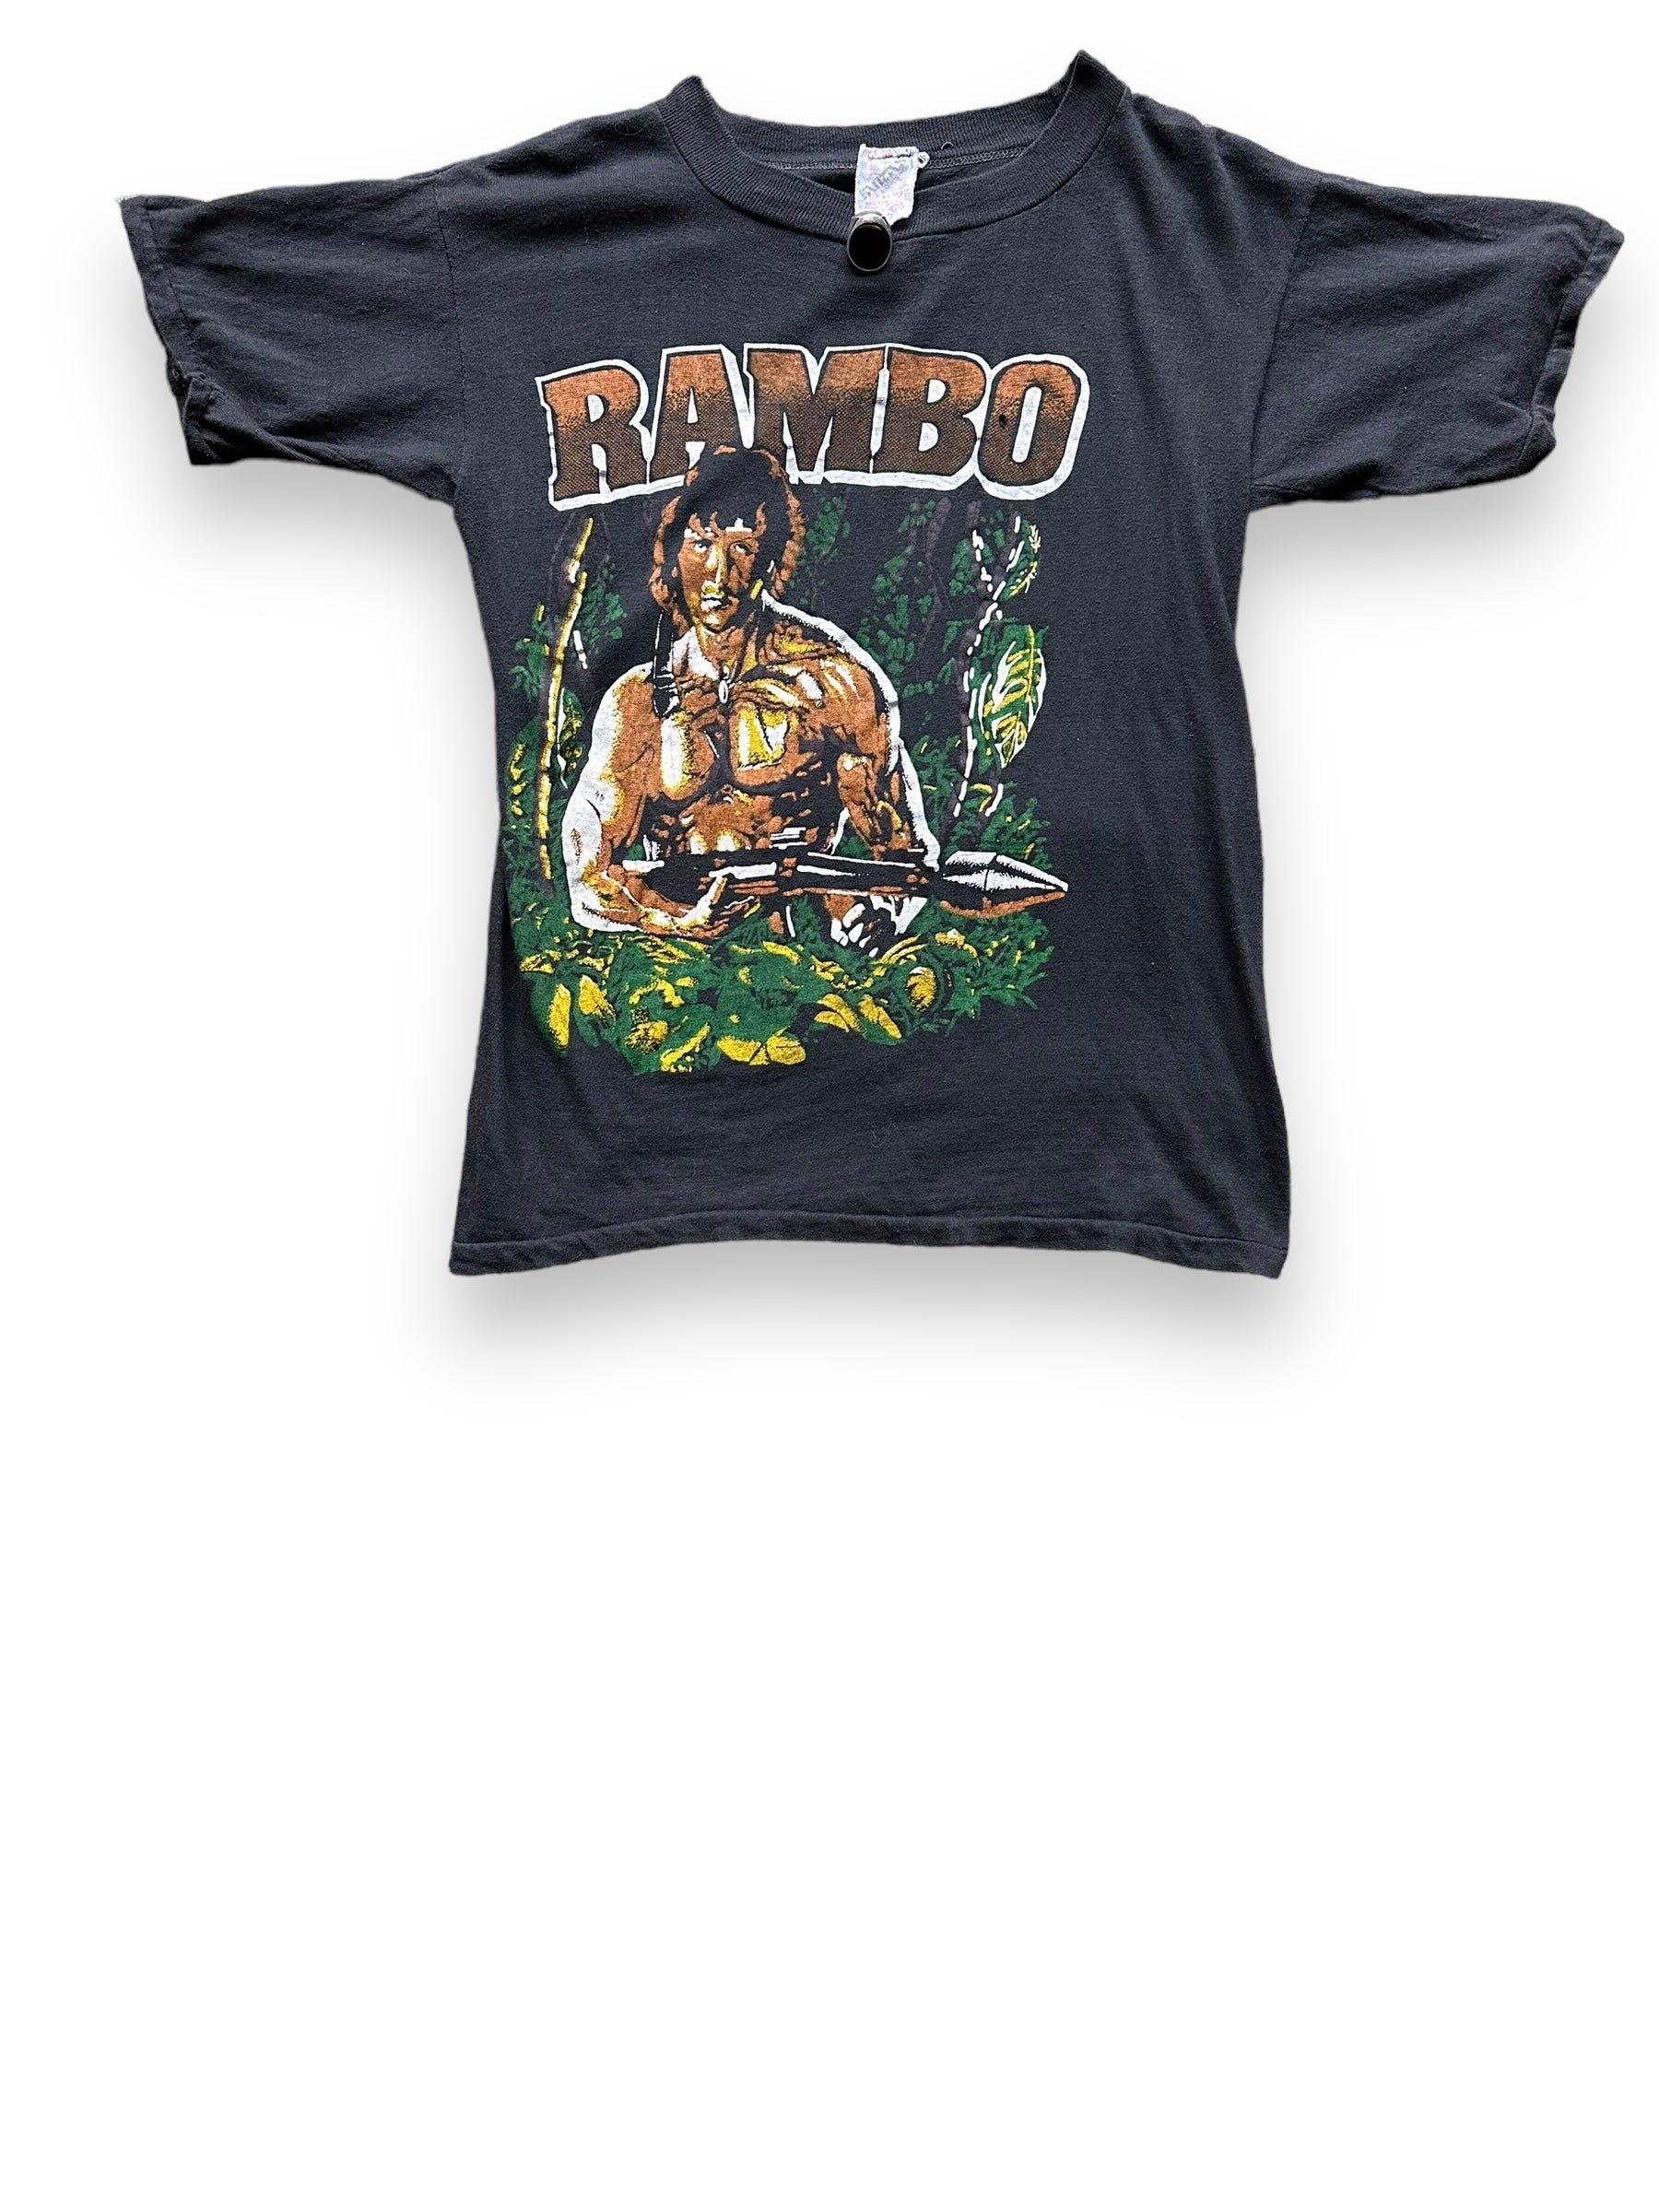 Front View of Vintage Sylvester Stallone Rambo T-Shirt SZ L |  Vintage John Rambo Tee Seattle | Barn Owl Vintage